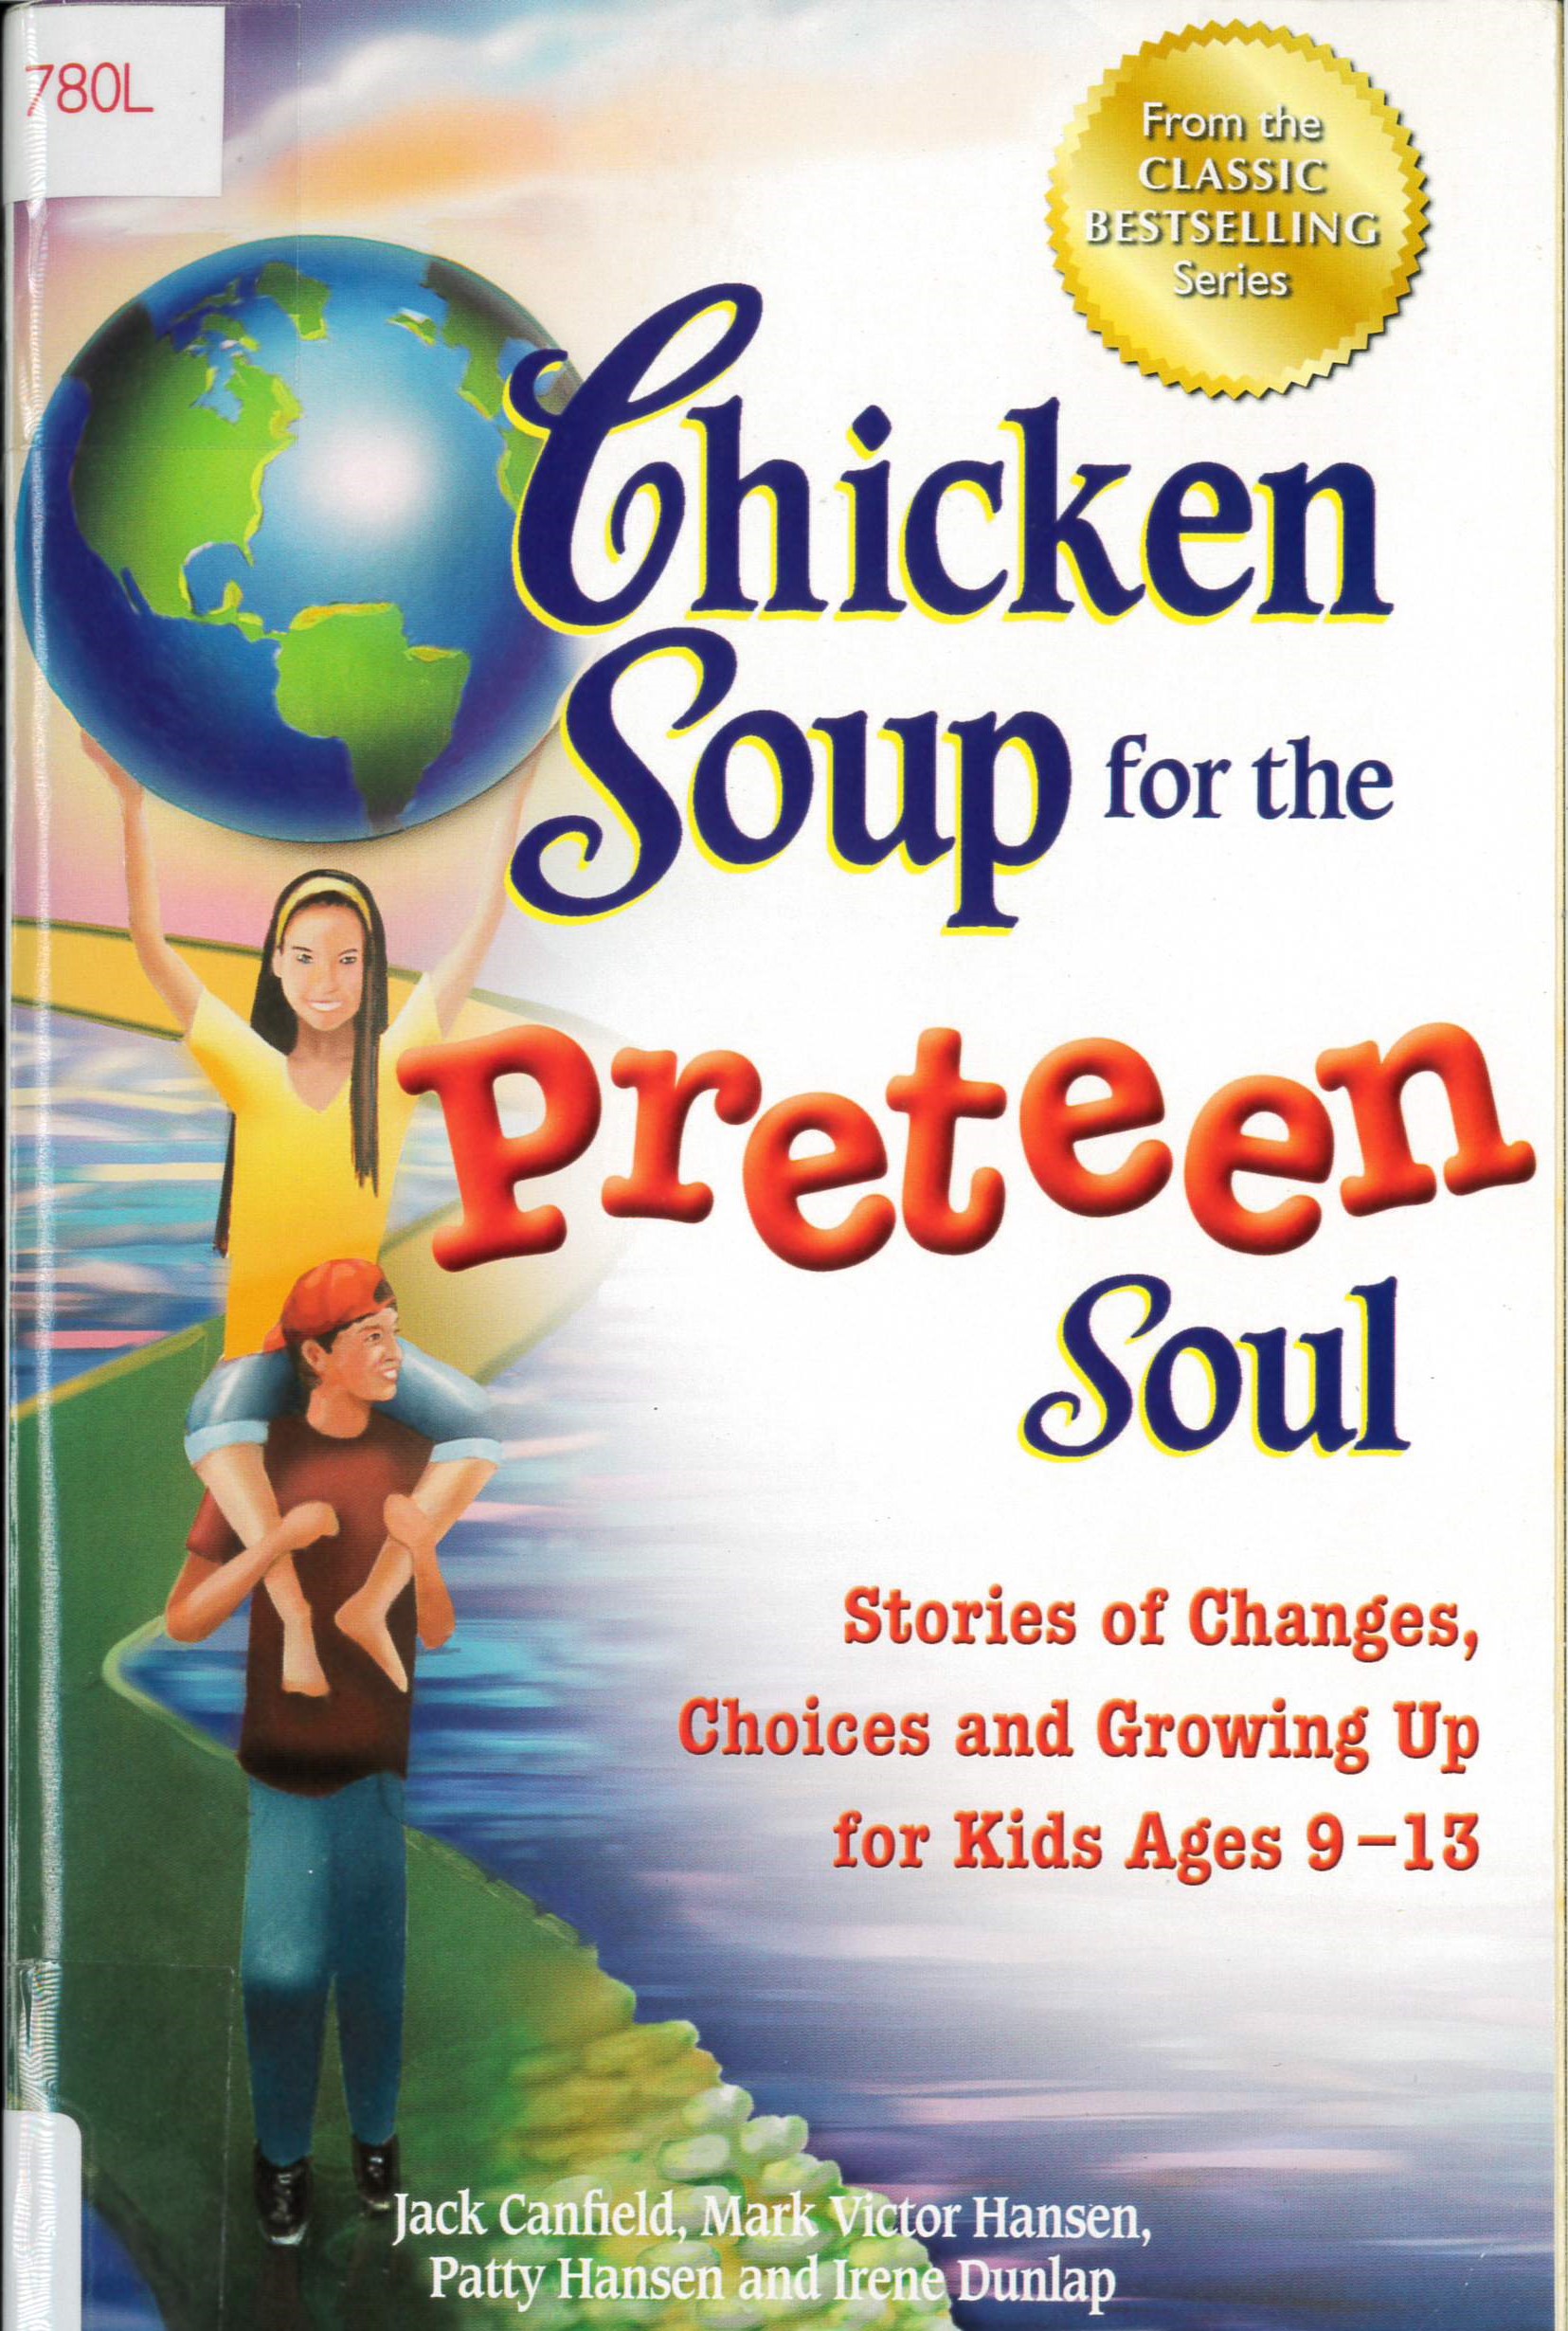 Chicken soup for the preteen soul : stories of changes, choices and growing up for kids ages 9-13 /